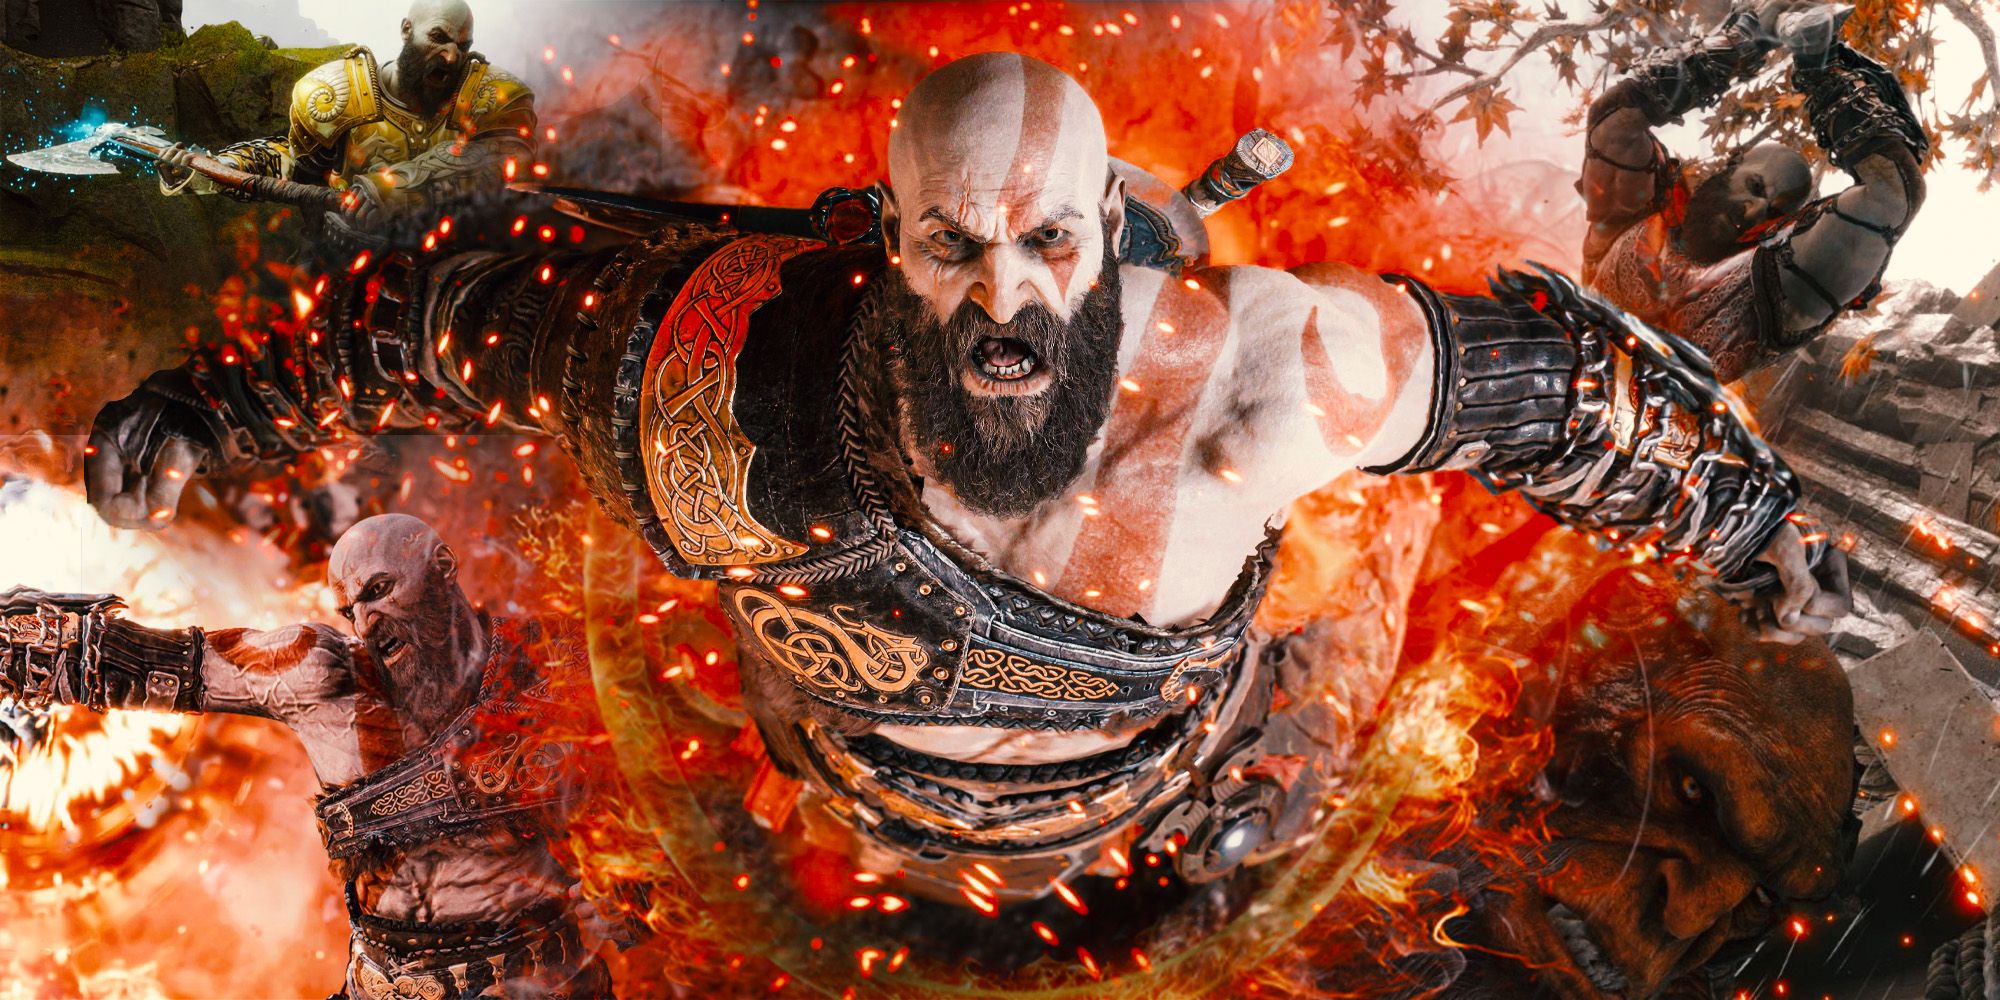 In the center of the image is Kratos, activating his Spartan Rage, looking up toward the camera, yelling, and surrounded by red, flame-like miasma. Around the edges of the image are various scenes of Kratos in combat.